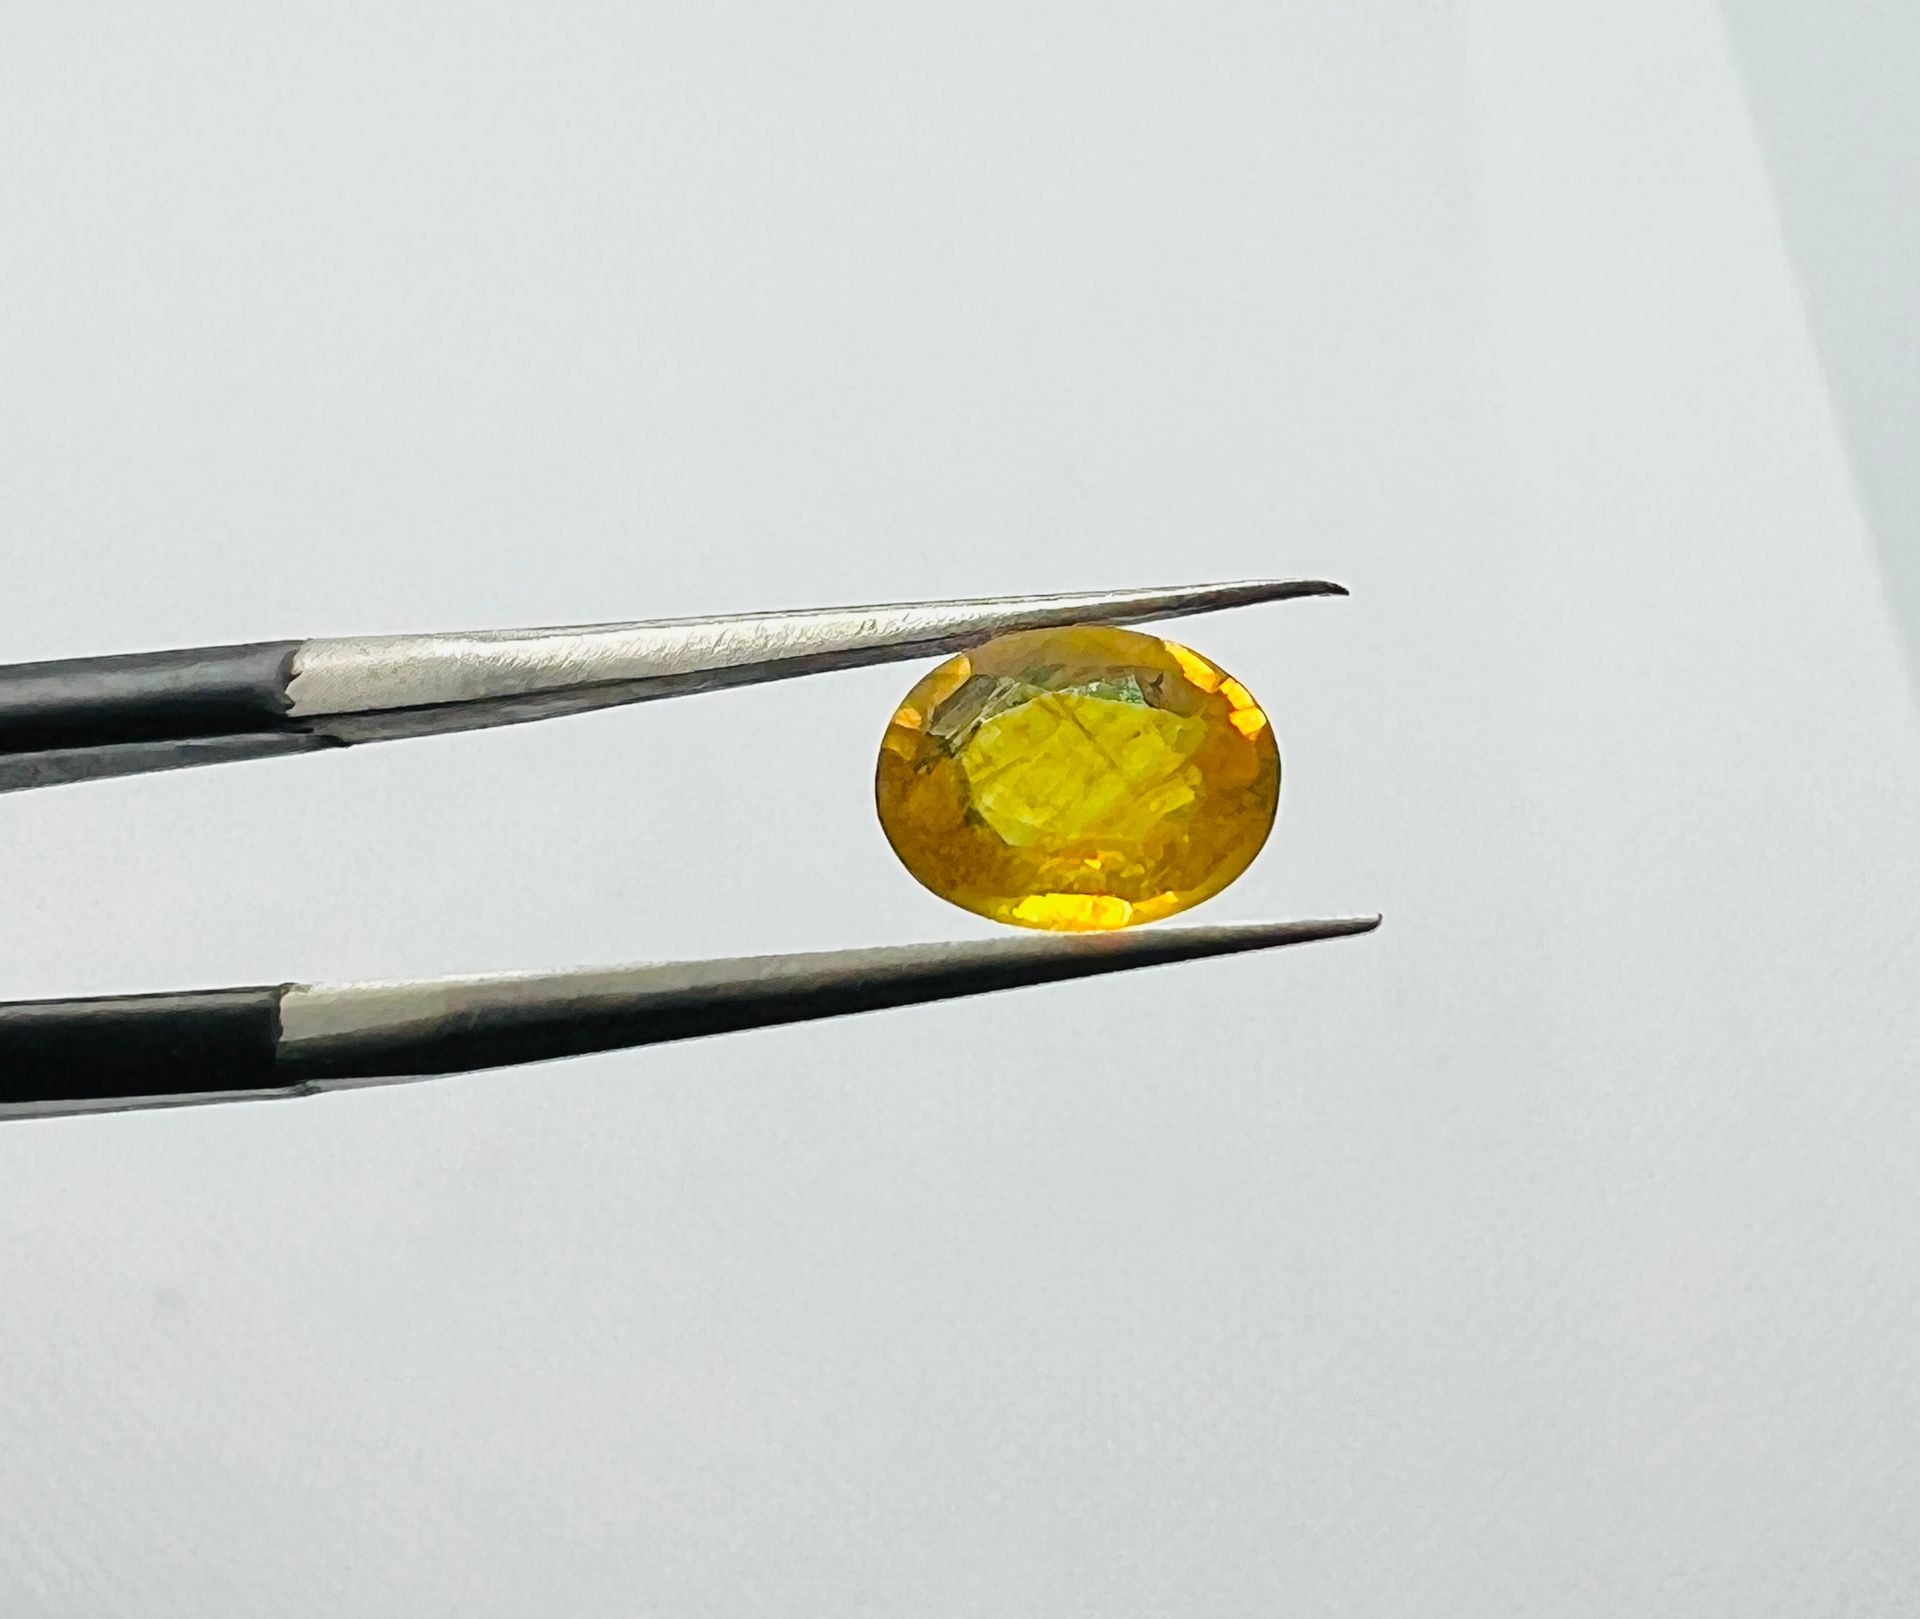 SAPHIRE YELLOW SAPHIRE of 1.31 carat AIGT certificate